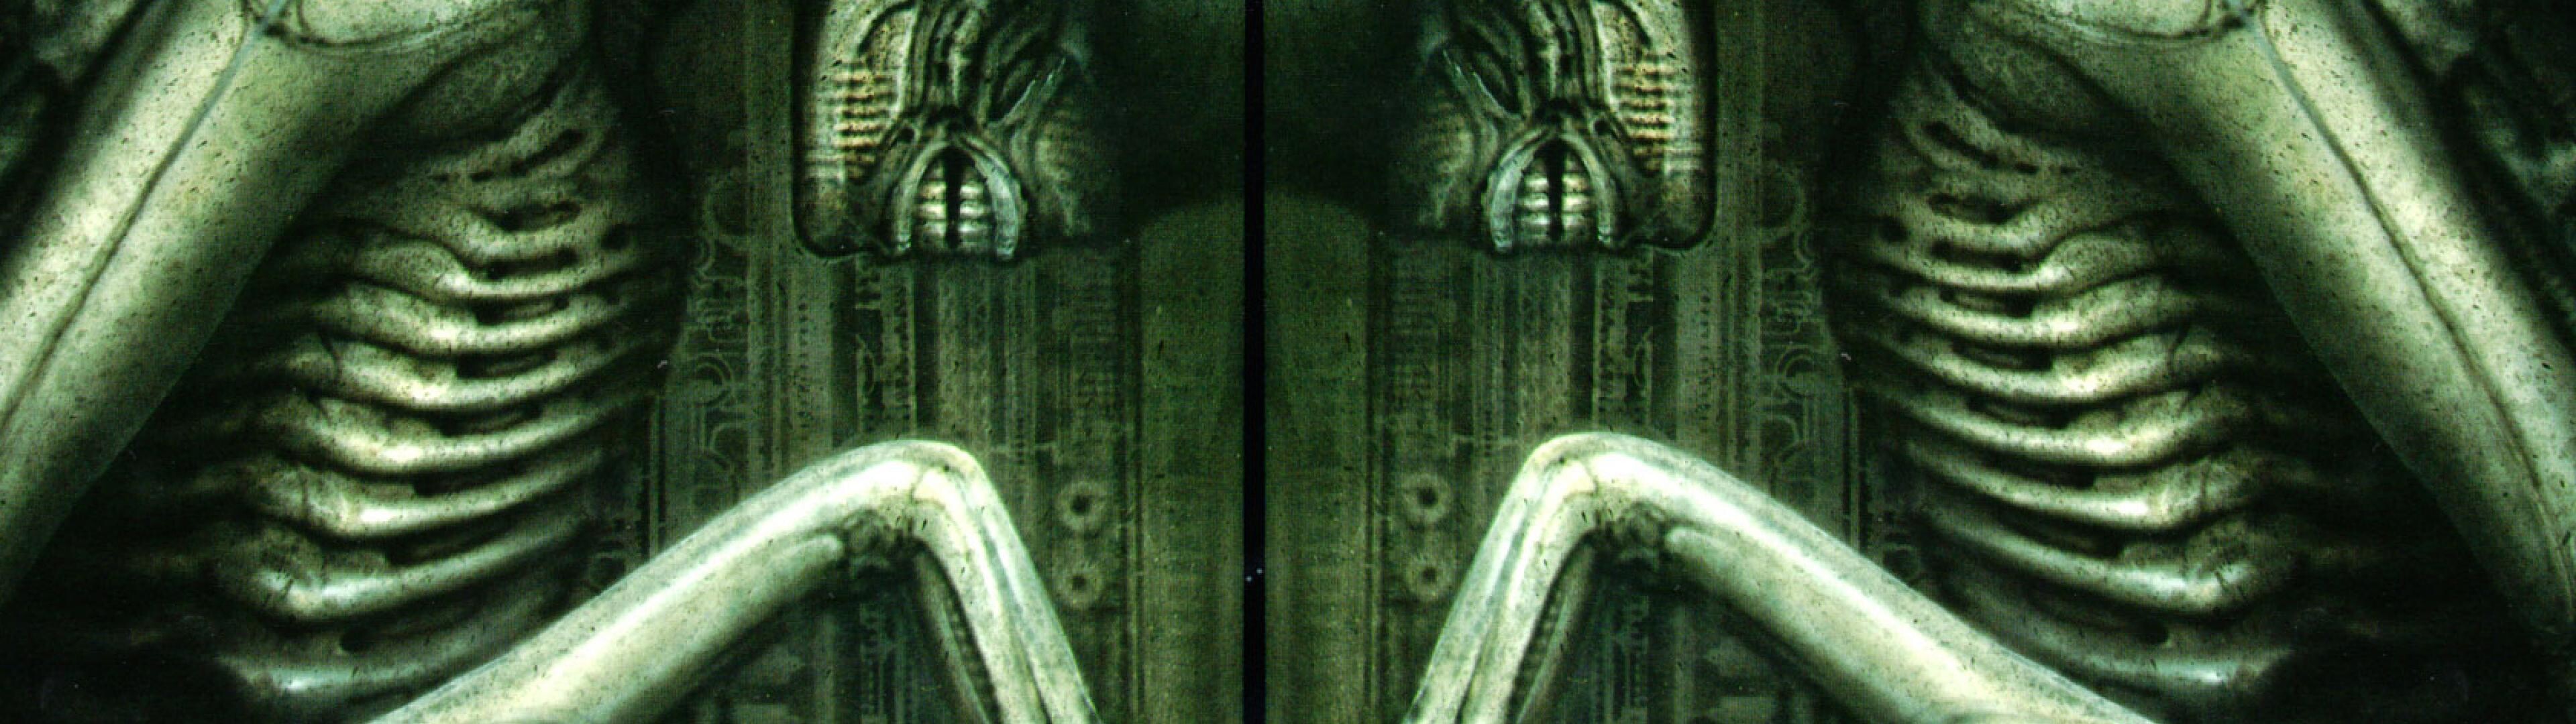 H.R. Giger: The Last One, Alien, Ridley Scott, 1979. 3840x1080 Dual Screen Background.